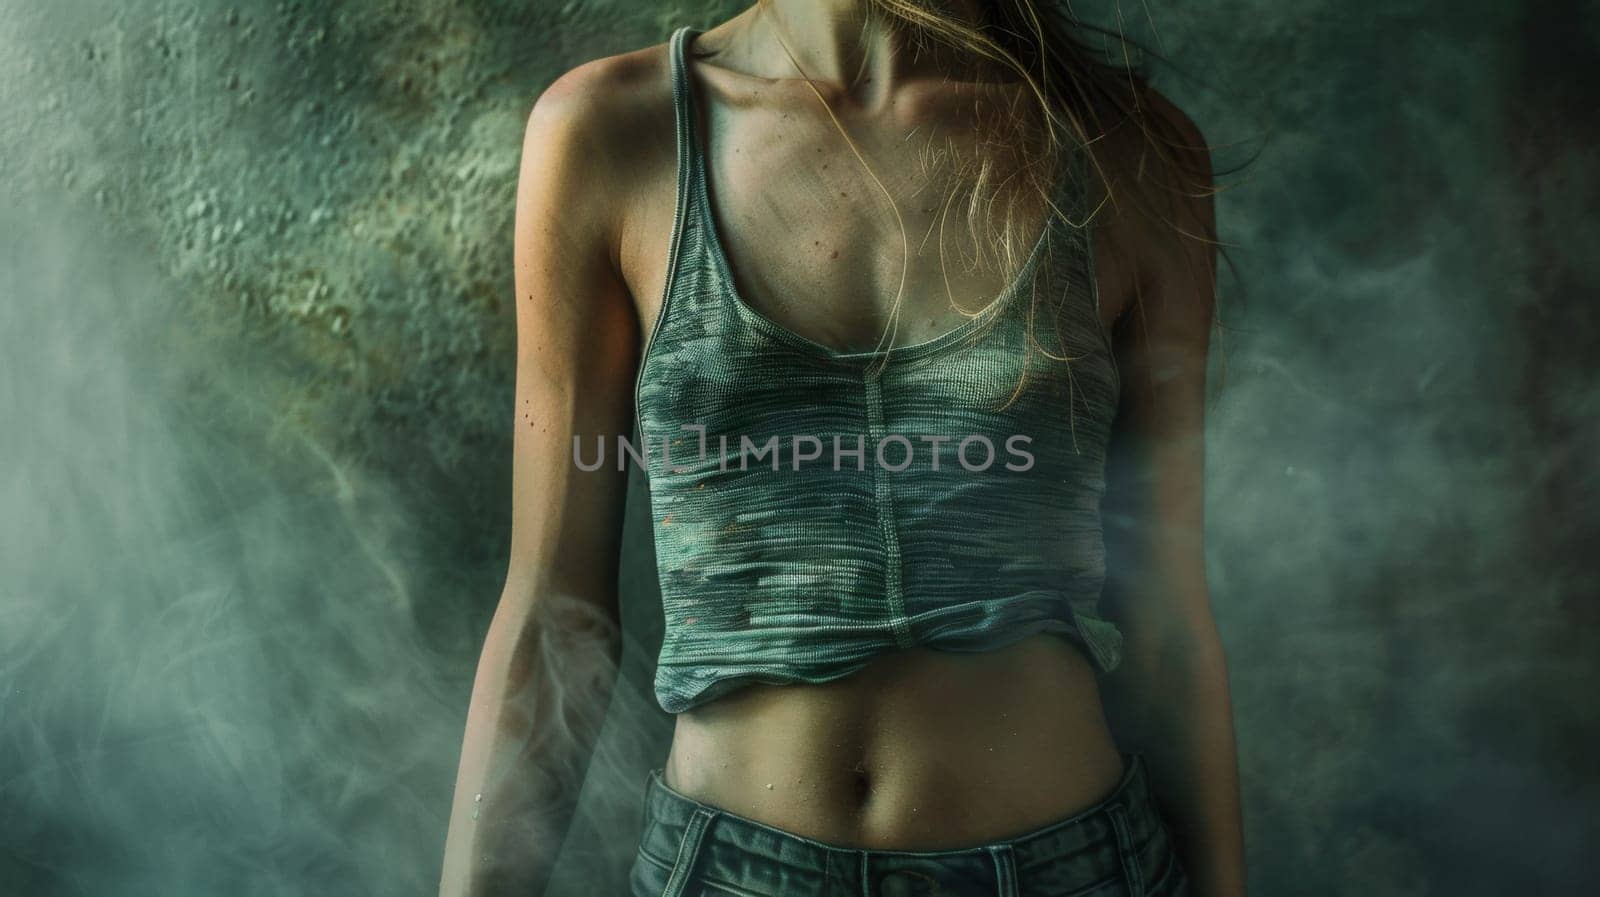 A woman in a tank top standing next to some smoke